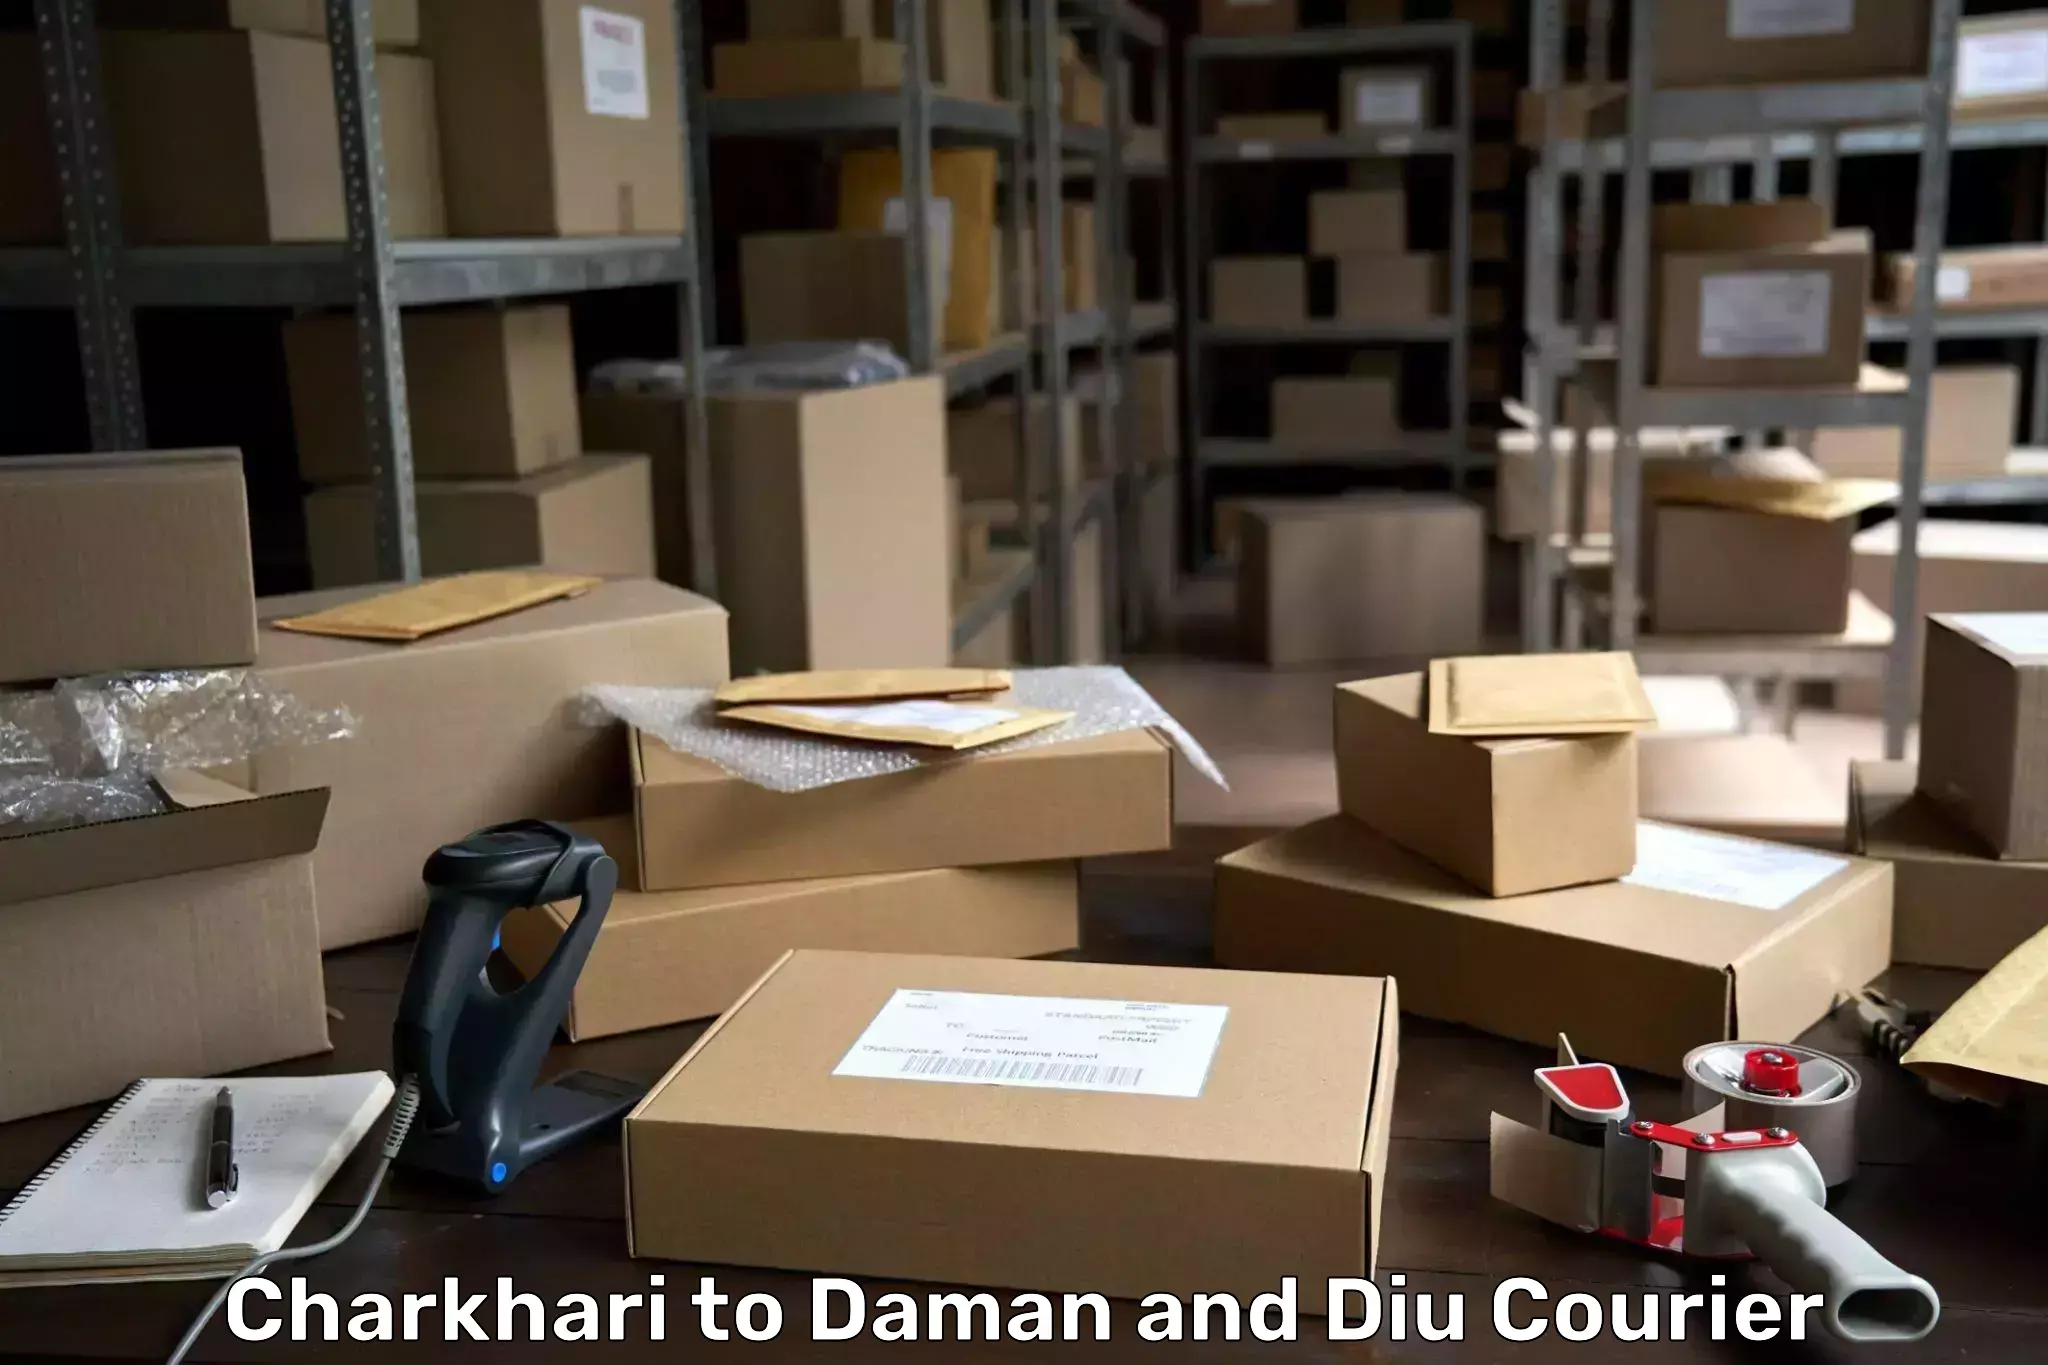 Reliable courier service Charkhari to Daman and Diu